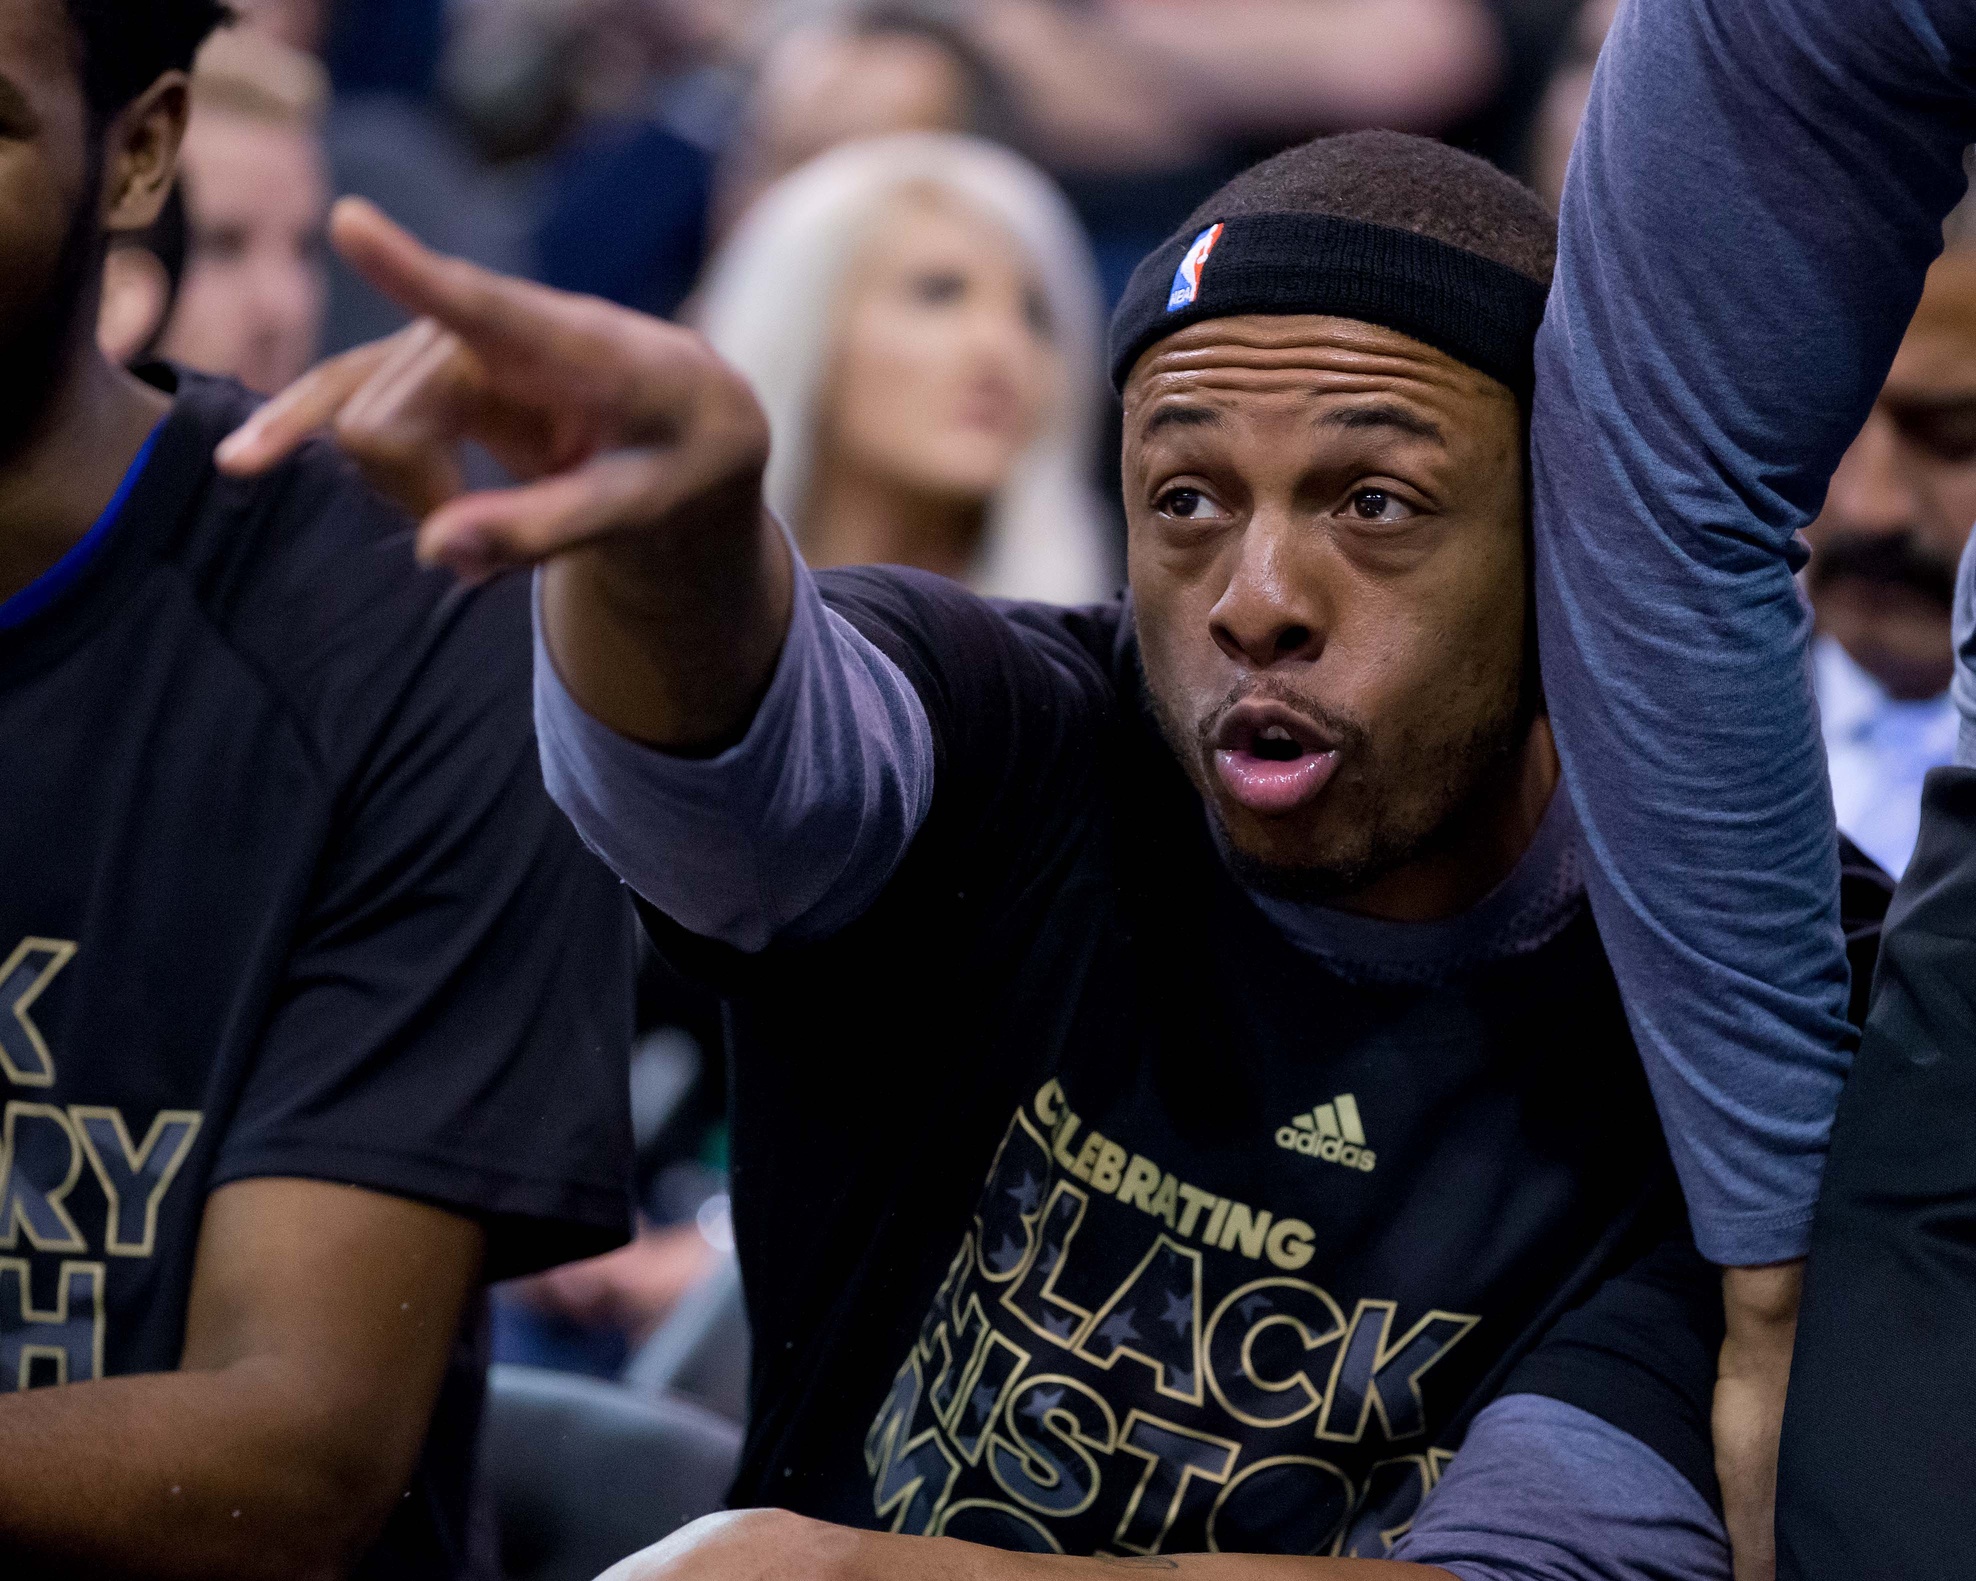 Feb 13, 2017; Salt Lake City, UT, USA; LA Clippers forward Paul Pierce (34) yells at Utah Jazz center Rudy Gobert (not pictured) from the bench area during the first half at Vivint Smart Home Arena. Mandatory Credit: Russ Isabella-USA TODAY Sports